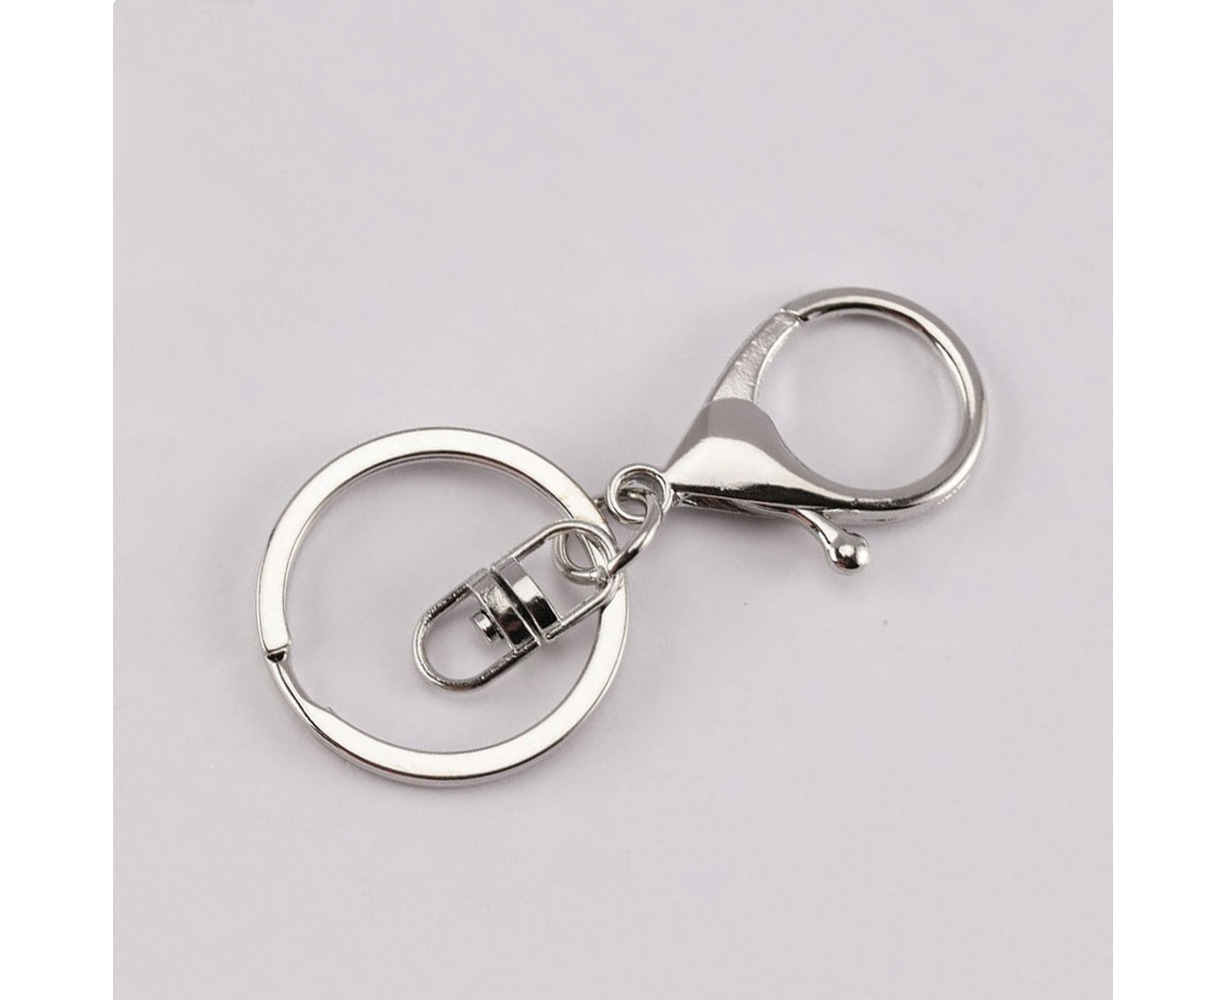 50PCS Metal Key Rings with Chains and Small Round Split Rings Keyring Blanks Metal Key Rings for Organizing Keys and Making Craft Borns Keychain Rings 